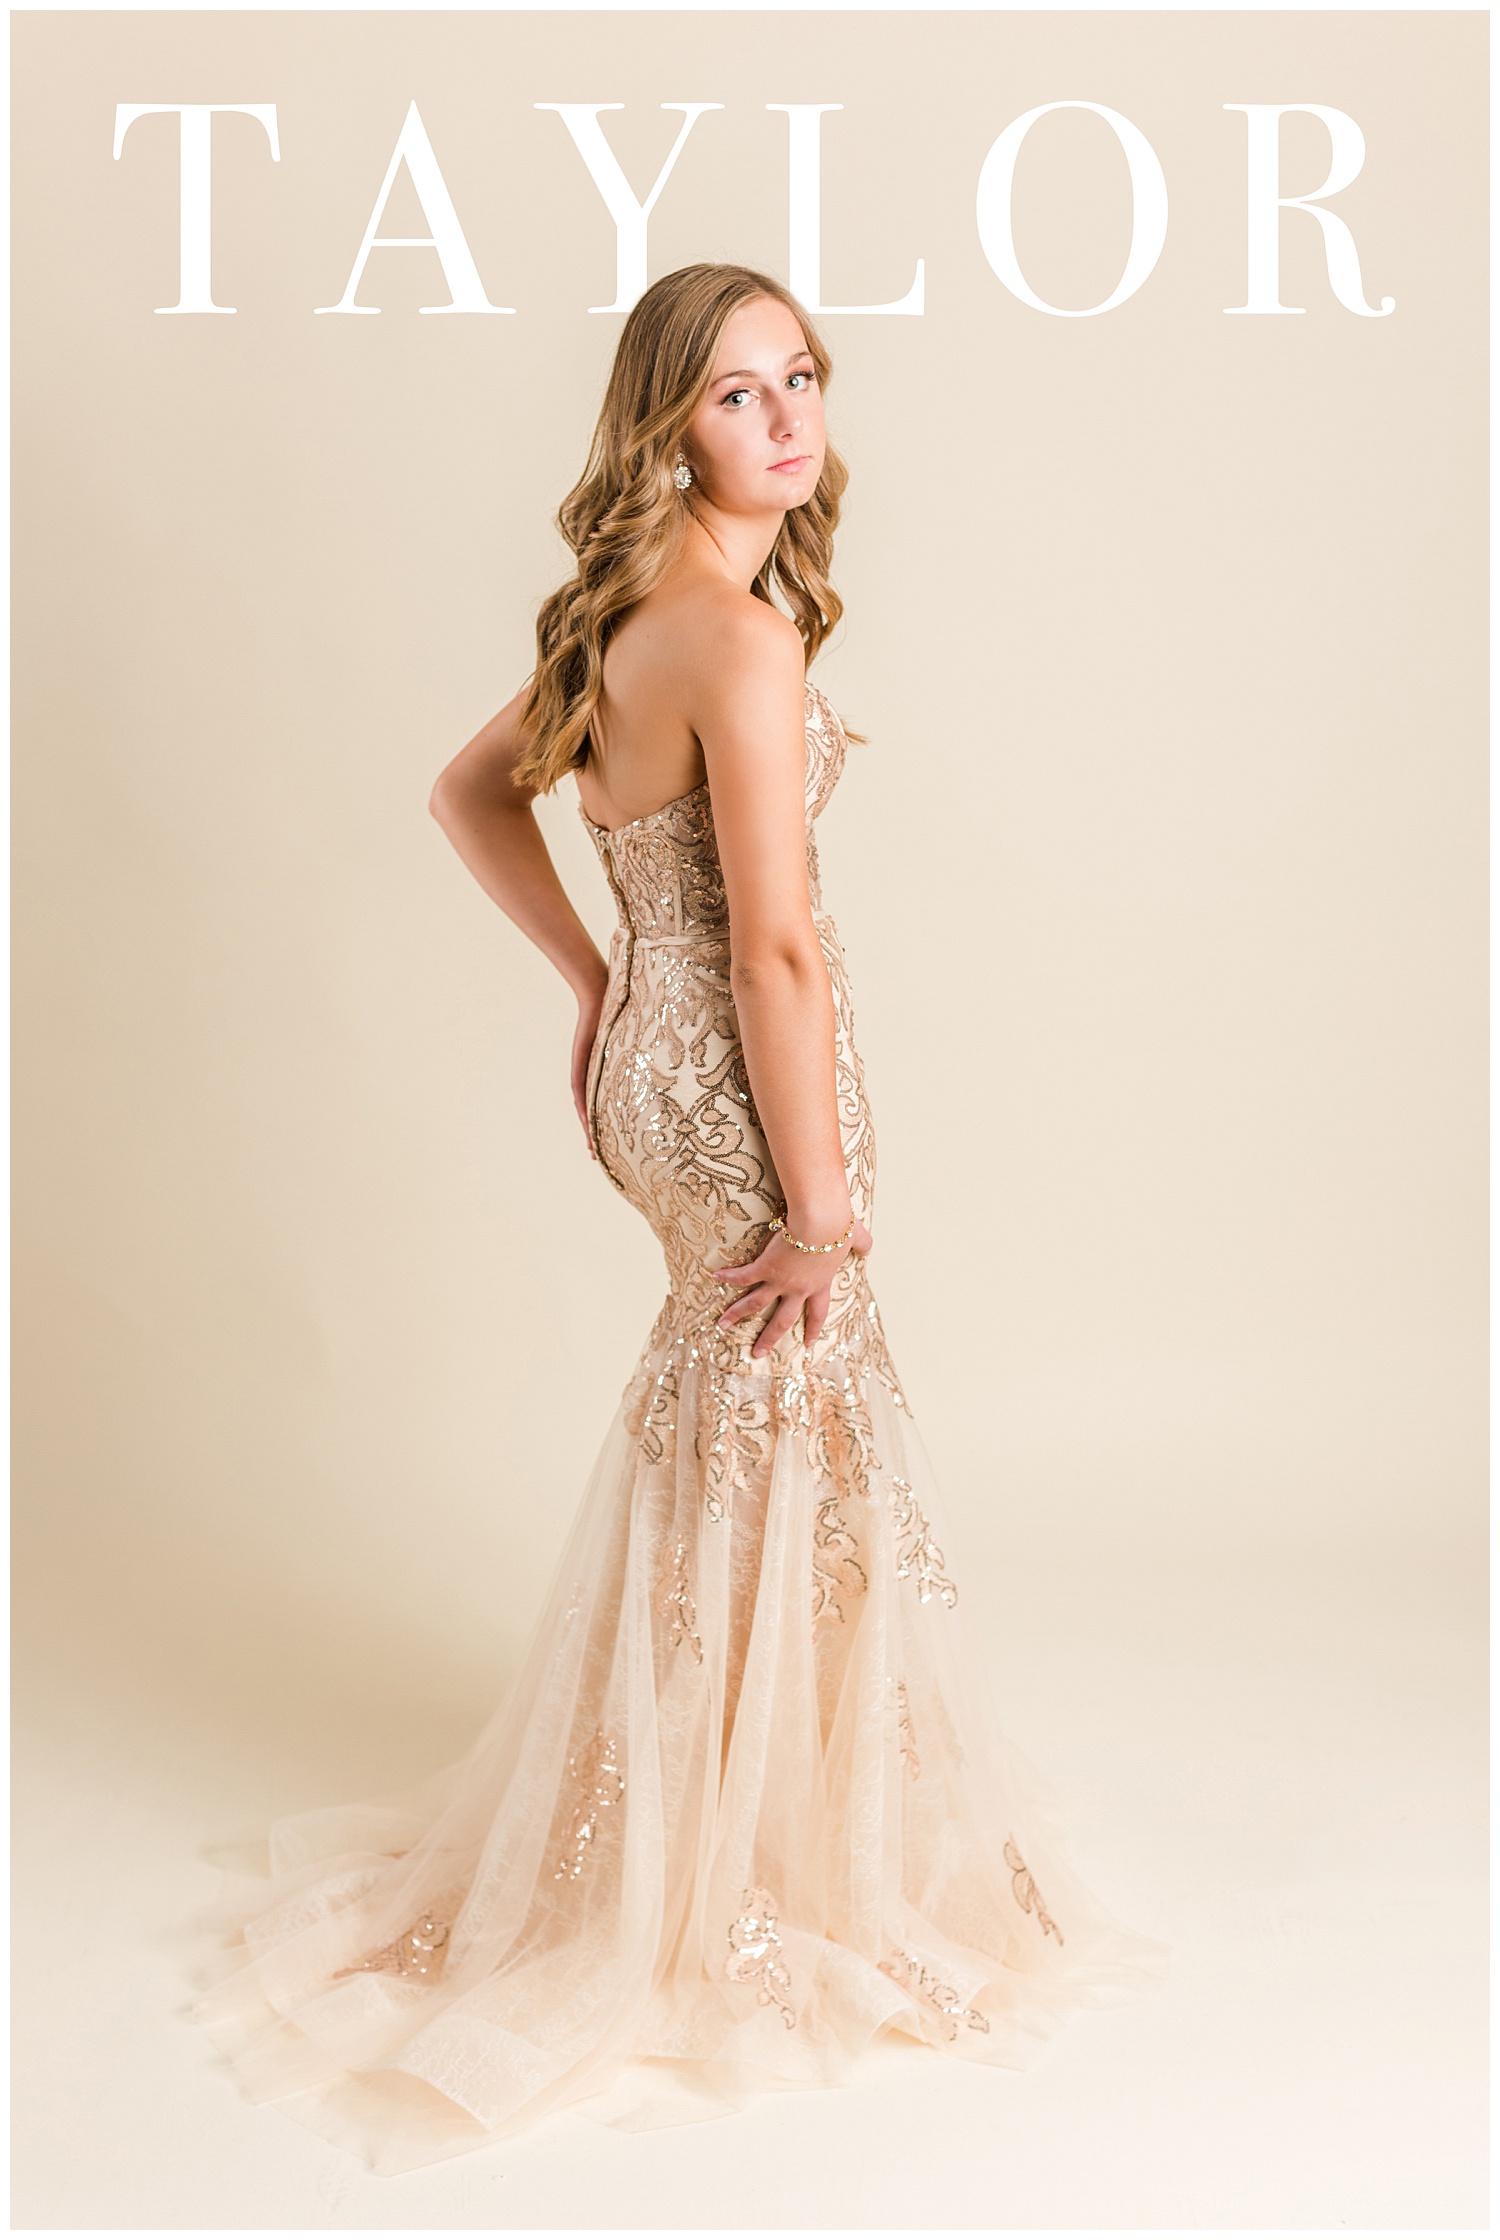 Taylor poses in a Morilee prom dress for a magazine cover | CB Studio